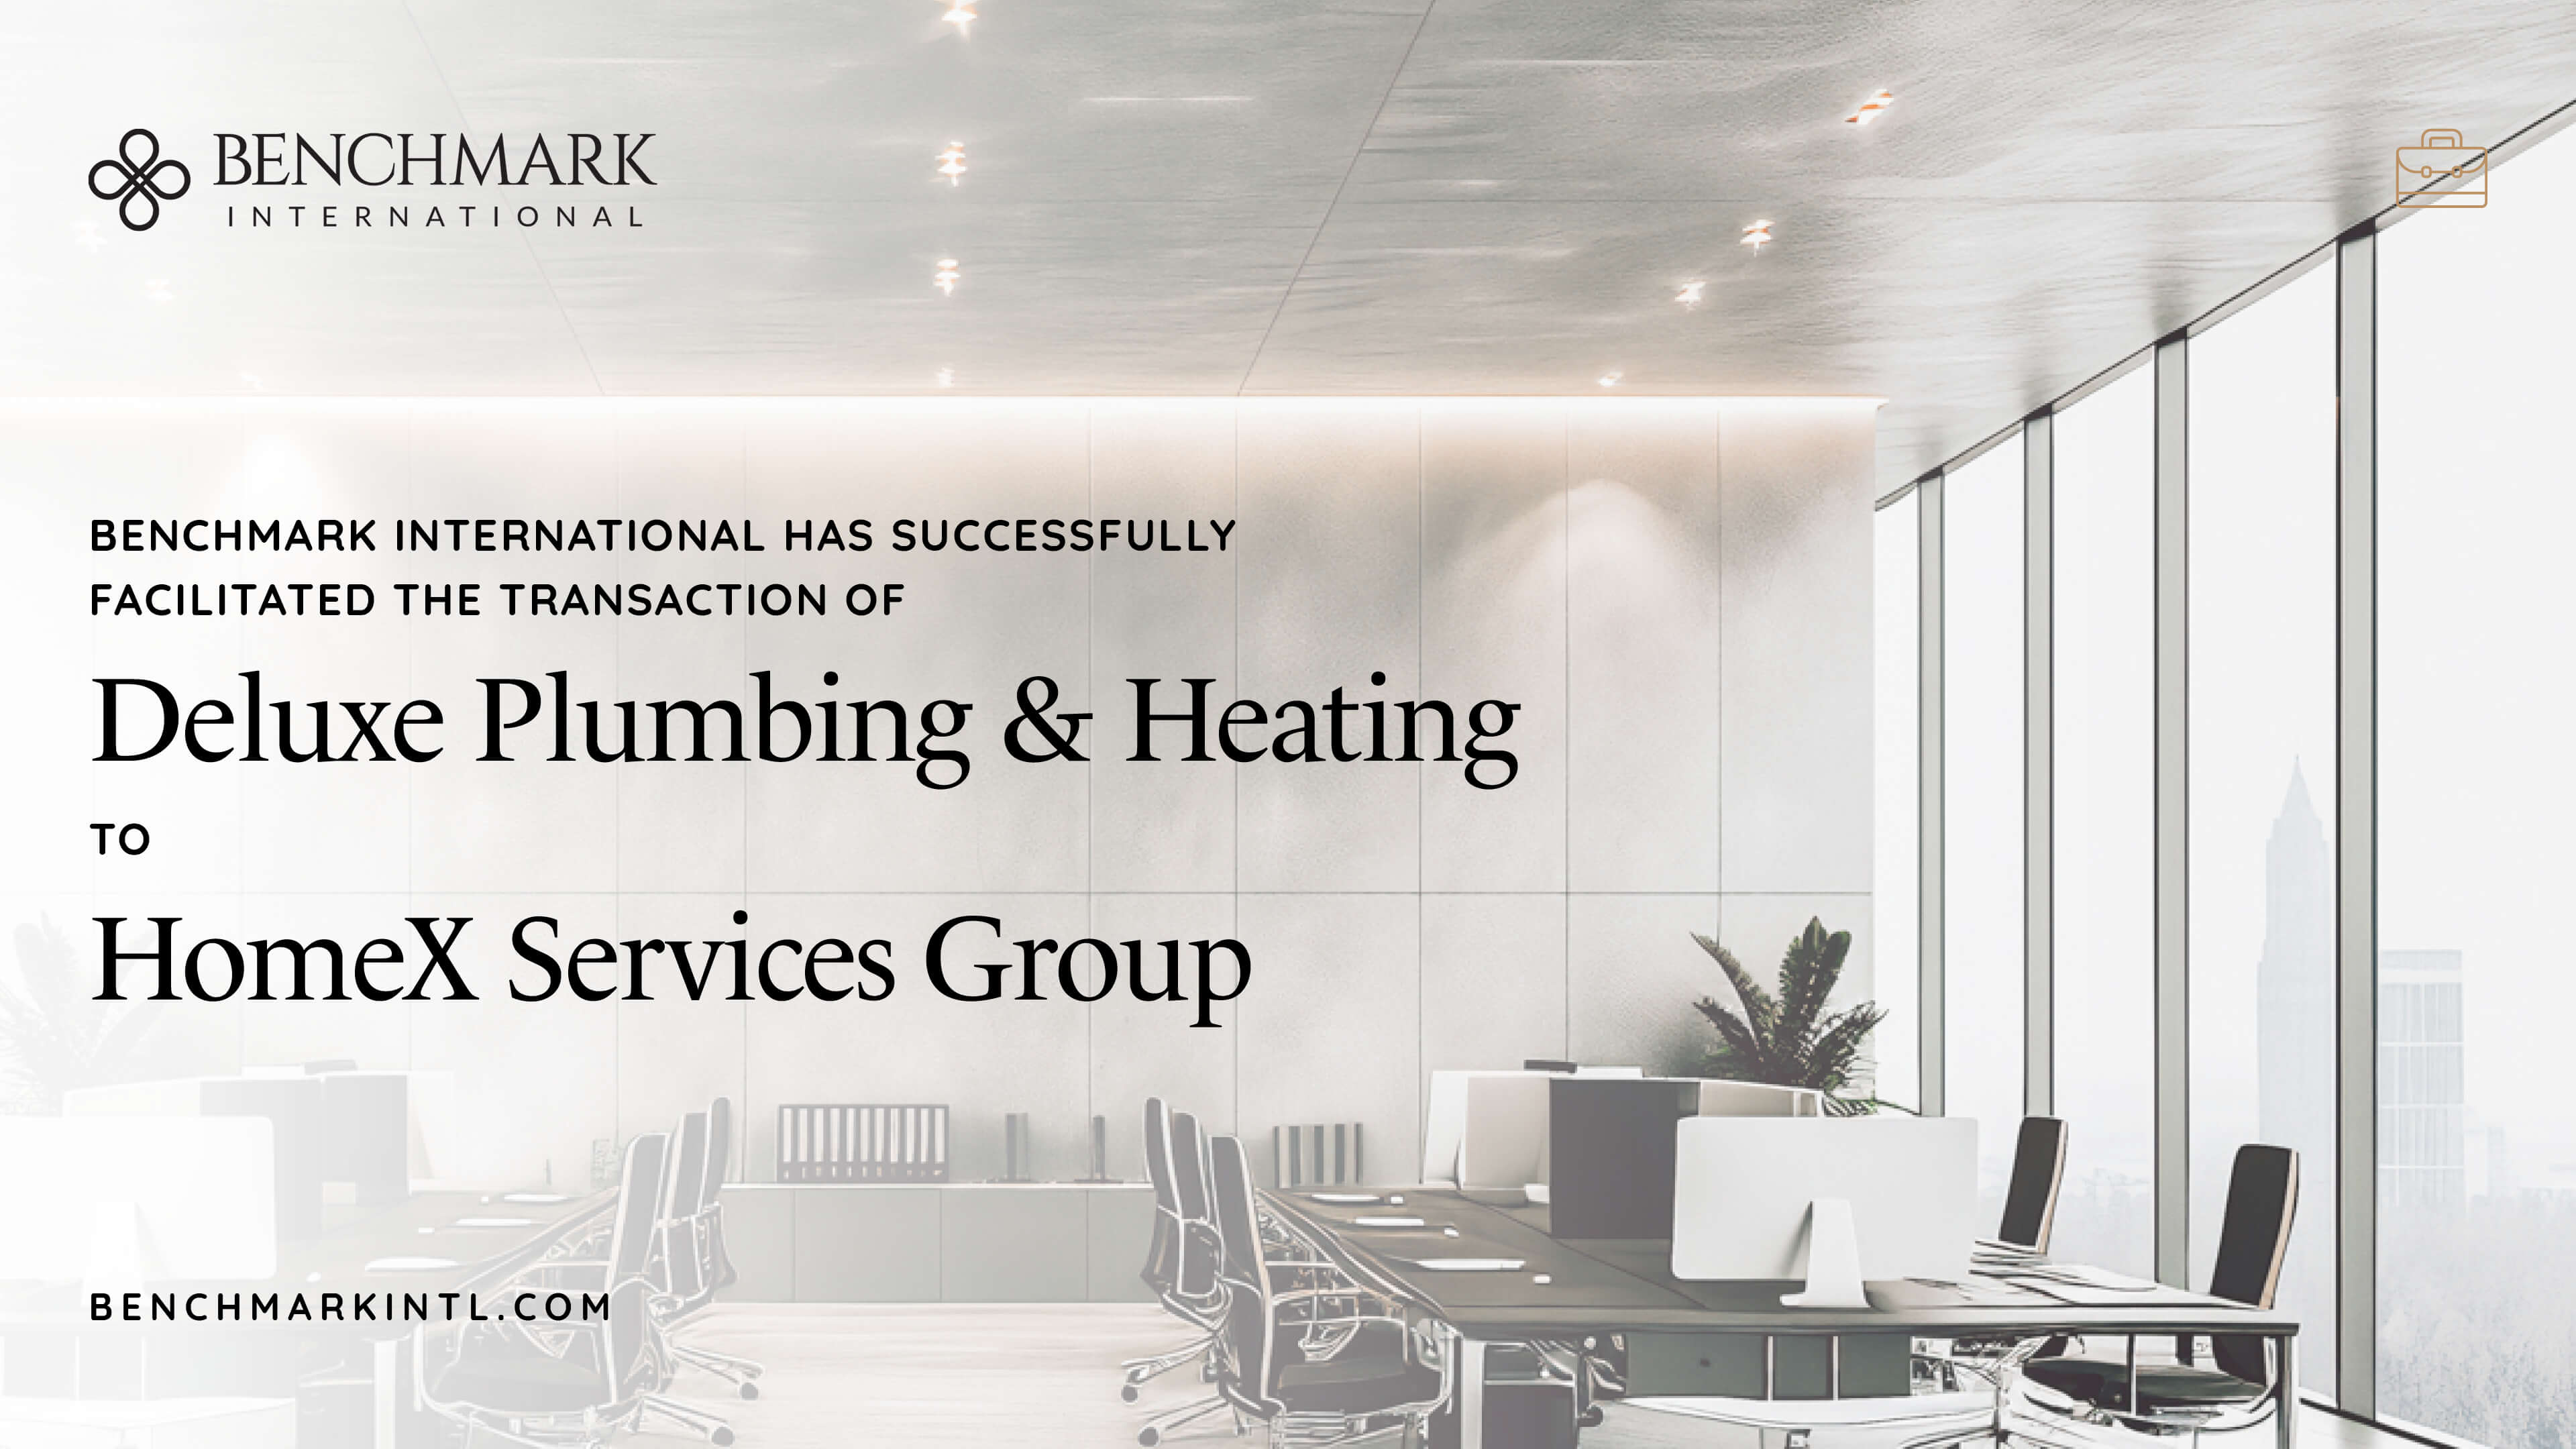 Benchmark International Facilitated The Transaction Of Deluxe Plumbing &amp; Heating To HomeX Services Group